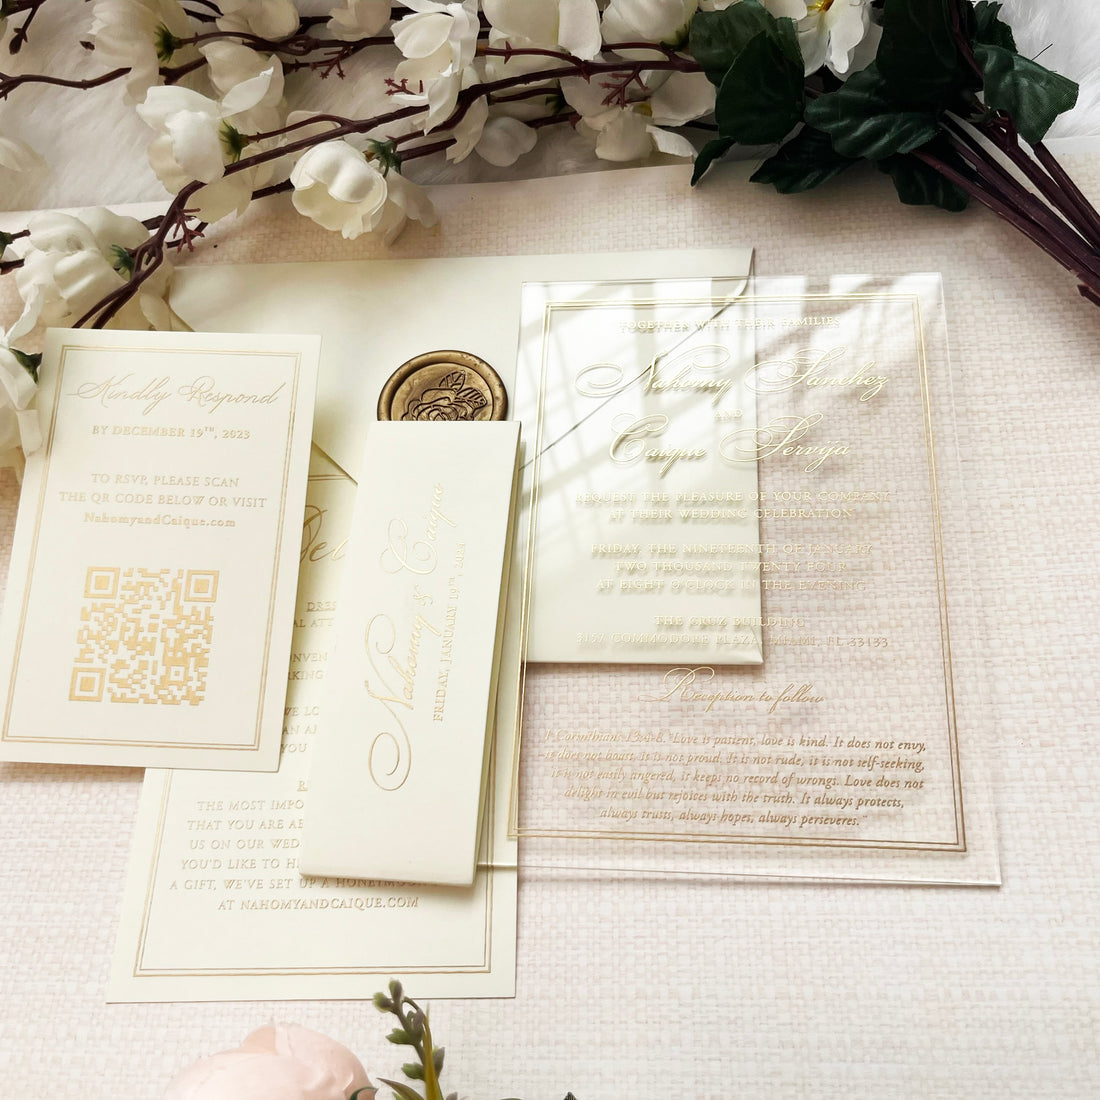 Elegant Acrylic Wedding Invitation, complete with RSVP. Featuring a lavish Gold Foil Wedding Invite, this Personalized Wedding Invitation Kit also includes delicate Rose Gold and Silver Foil details for a touch of opulence